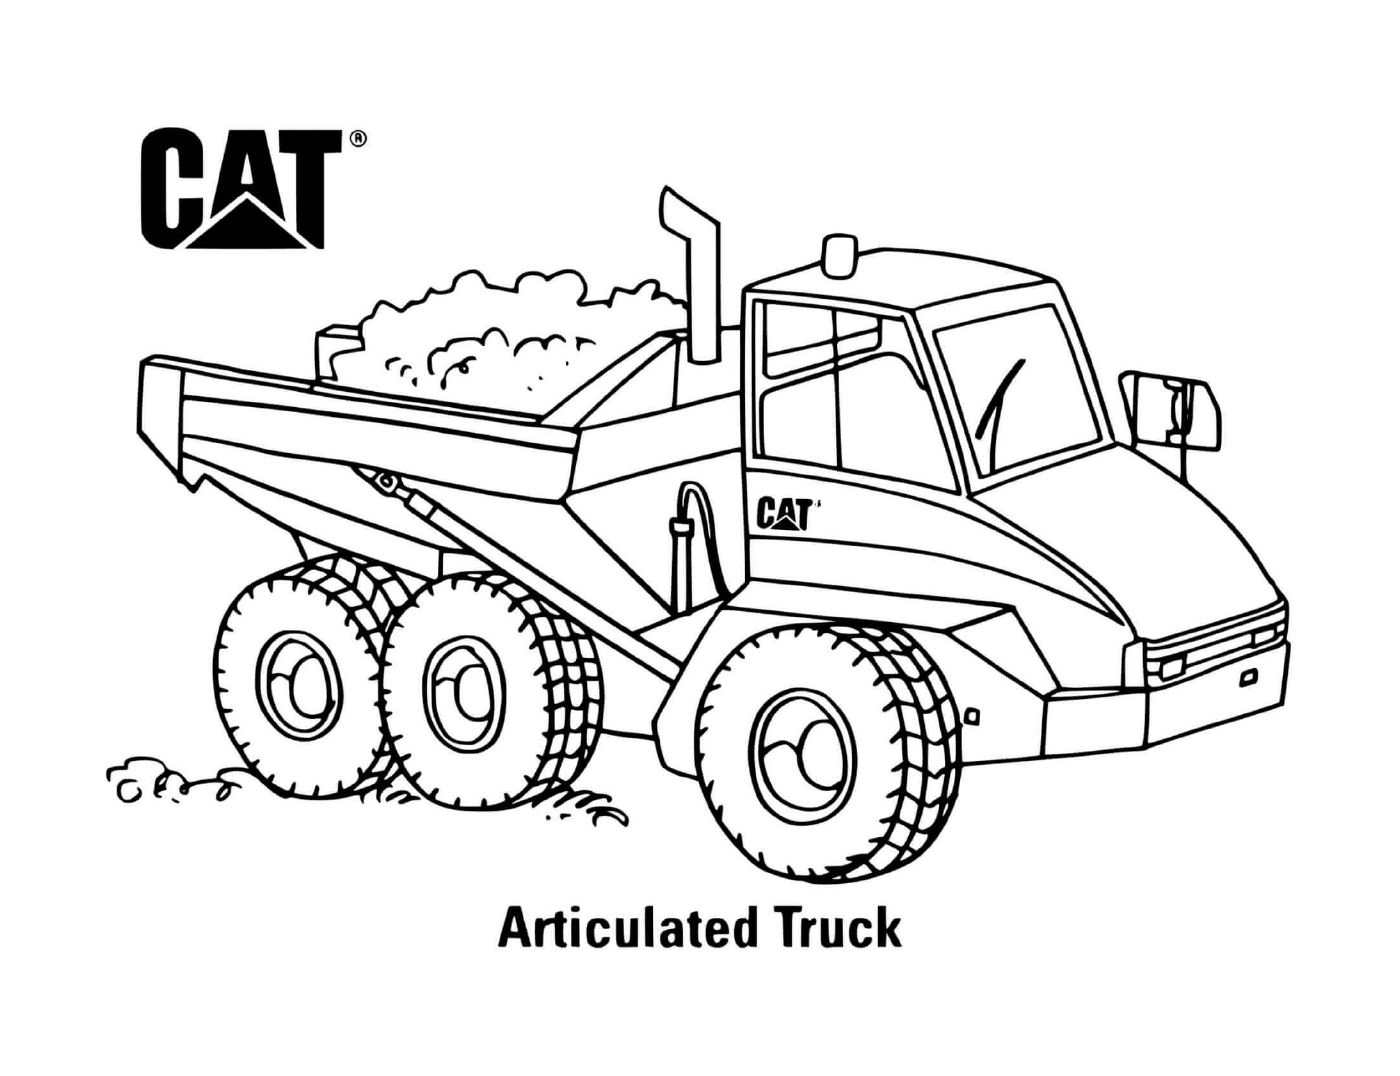  CAT articulated dump truck used on a construction site 